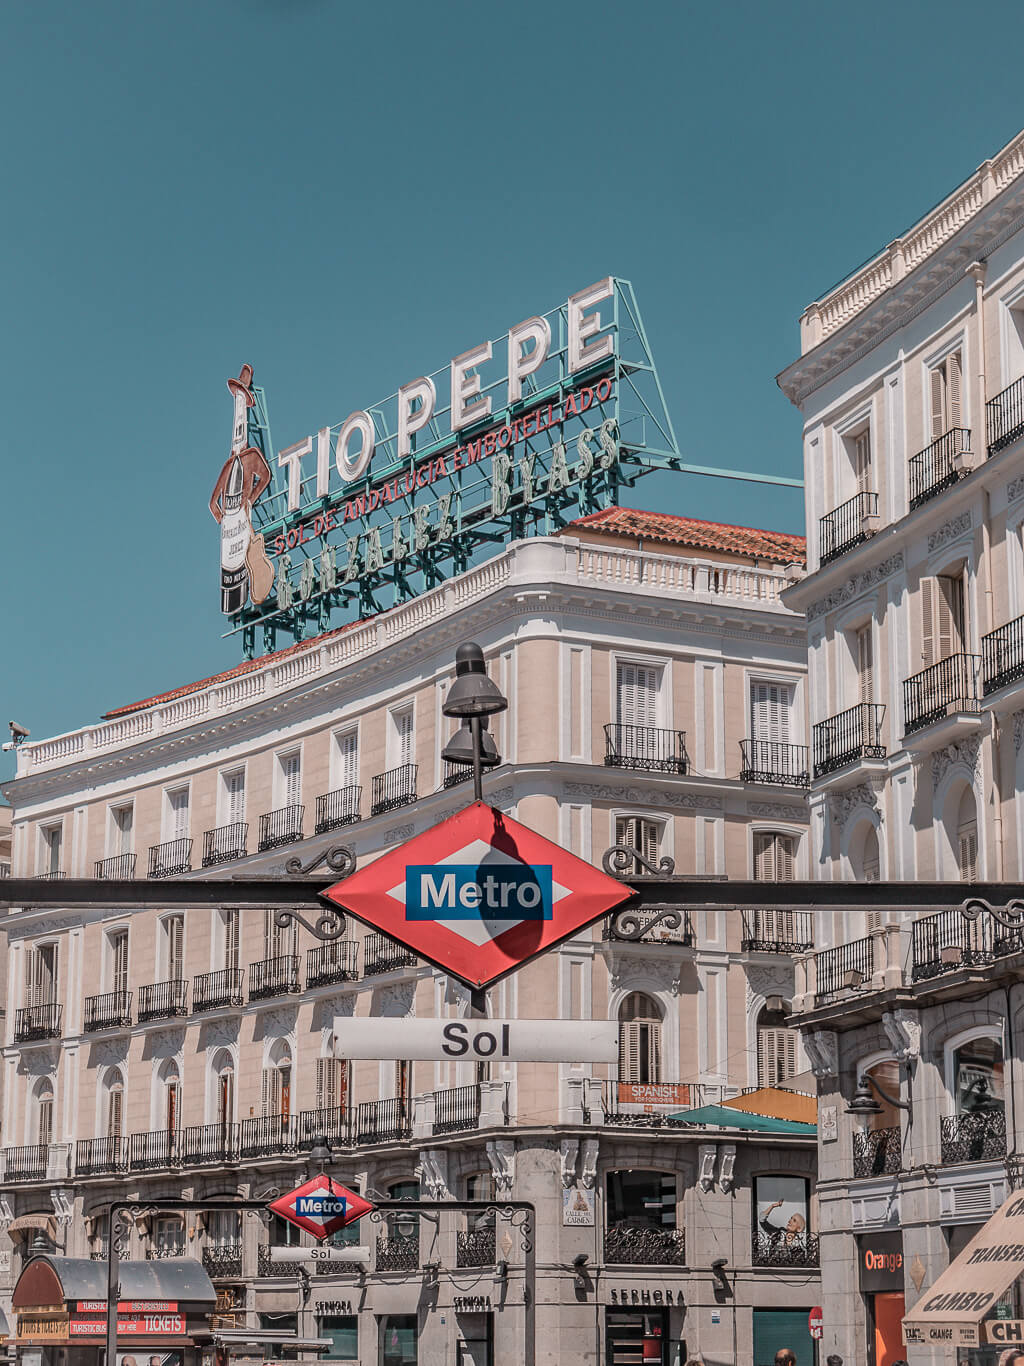 The special atmosphere and character of the city, the impressive architecture, its well-maintained parks, and its famous tapas - Madrid will steal your heart! Click through to get inspired with these 20 pictures from the beautiful capital of Spain!